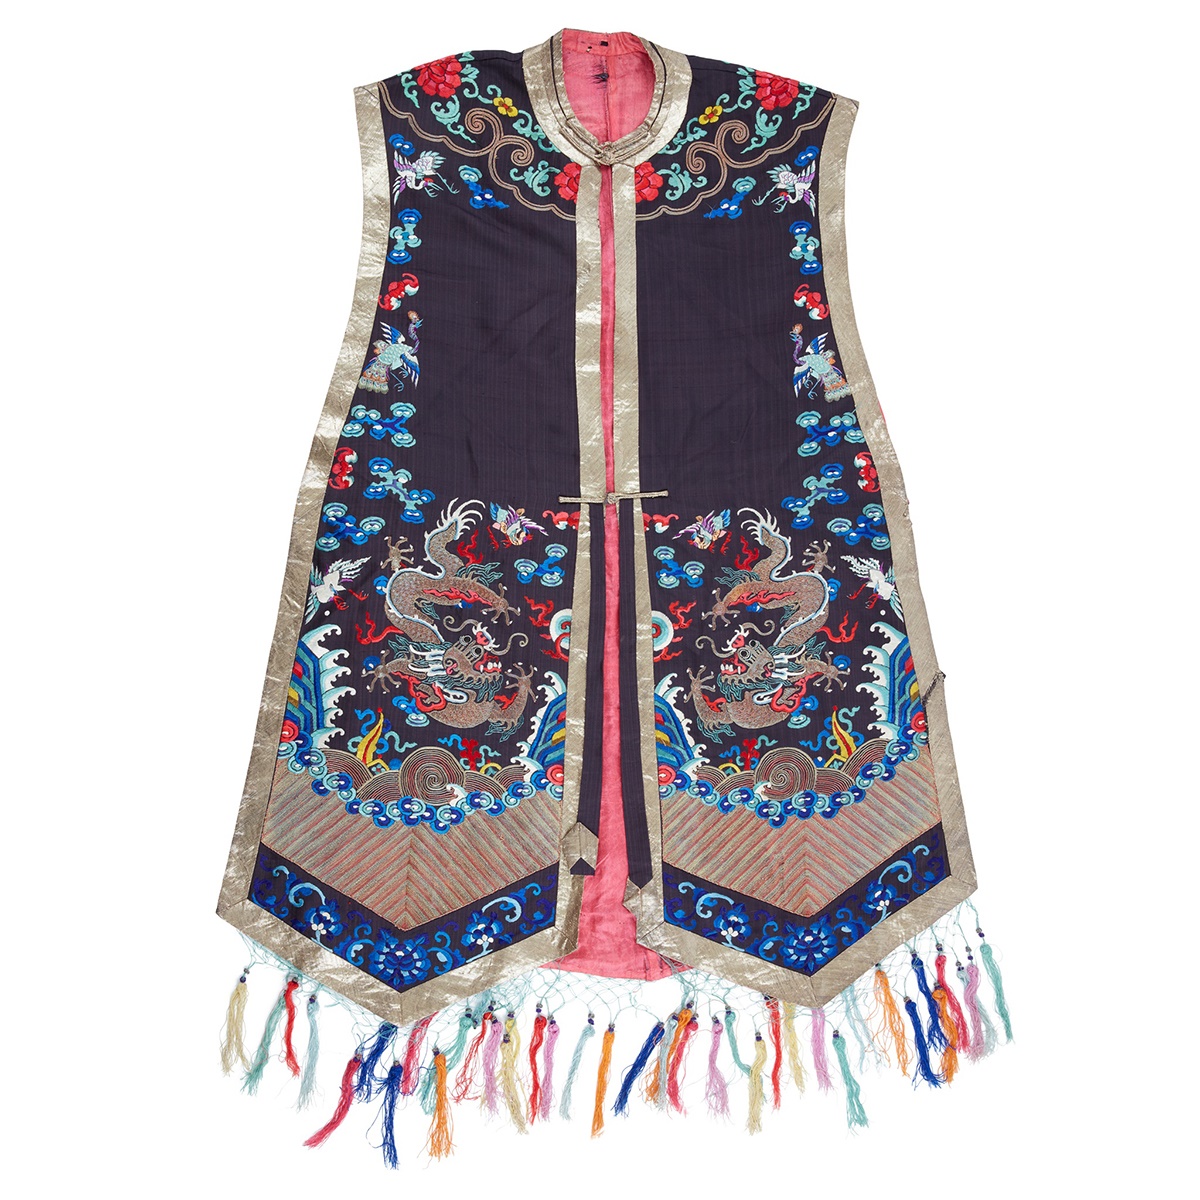 LOT 28 | WOMAN'S EMBROIDERED SILK VEST, XIAPEI | LATE QING DYNASTY TO REPUBLIC PERIOD, 19TH-20TH CENTURY 清末民初 繡金龍紋霞帔 | £300 - £500 + fees